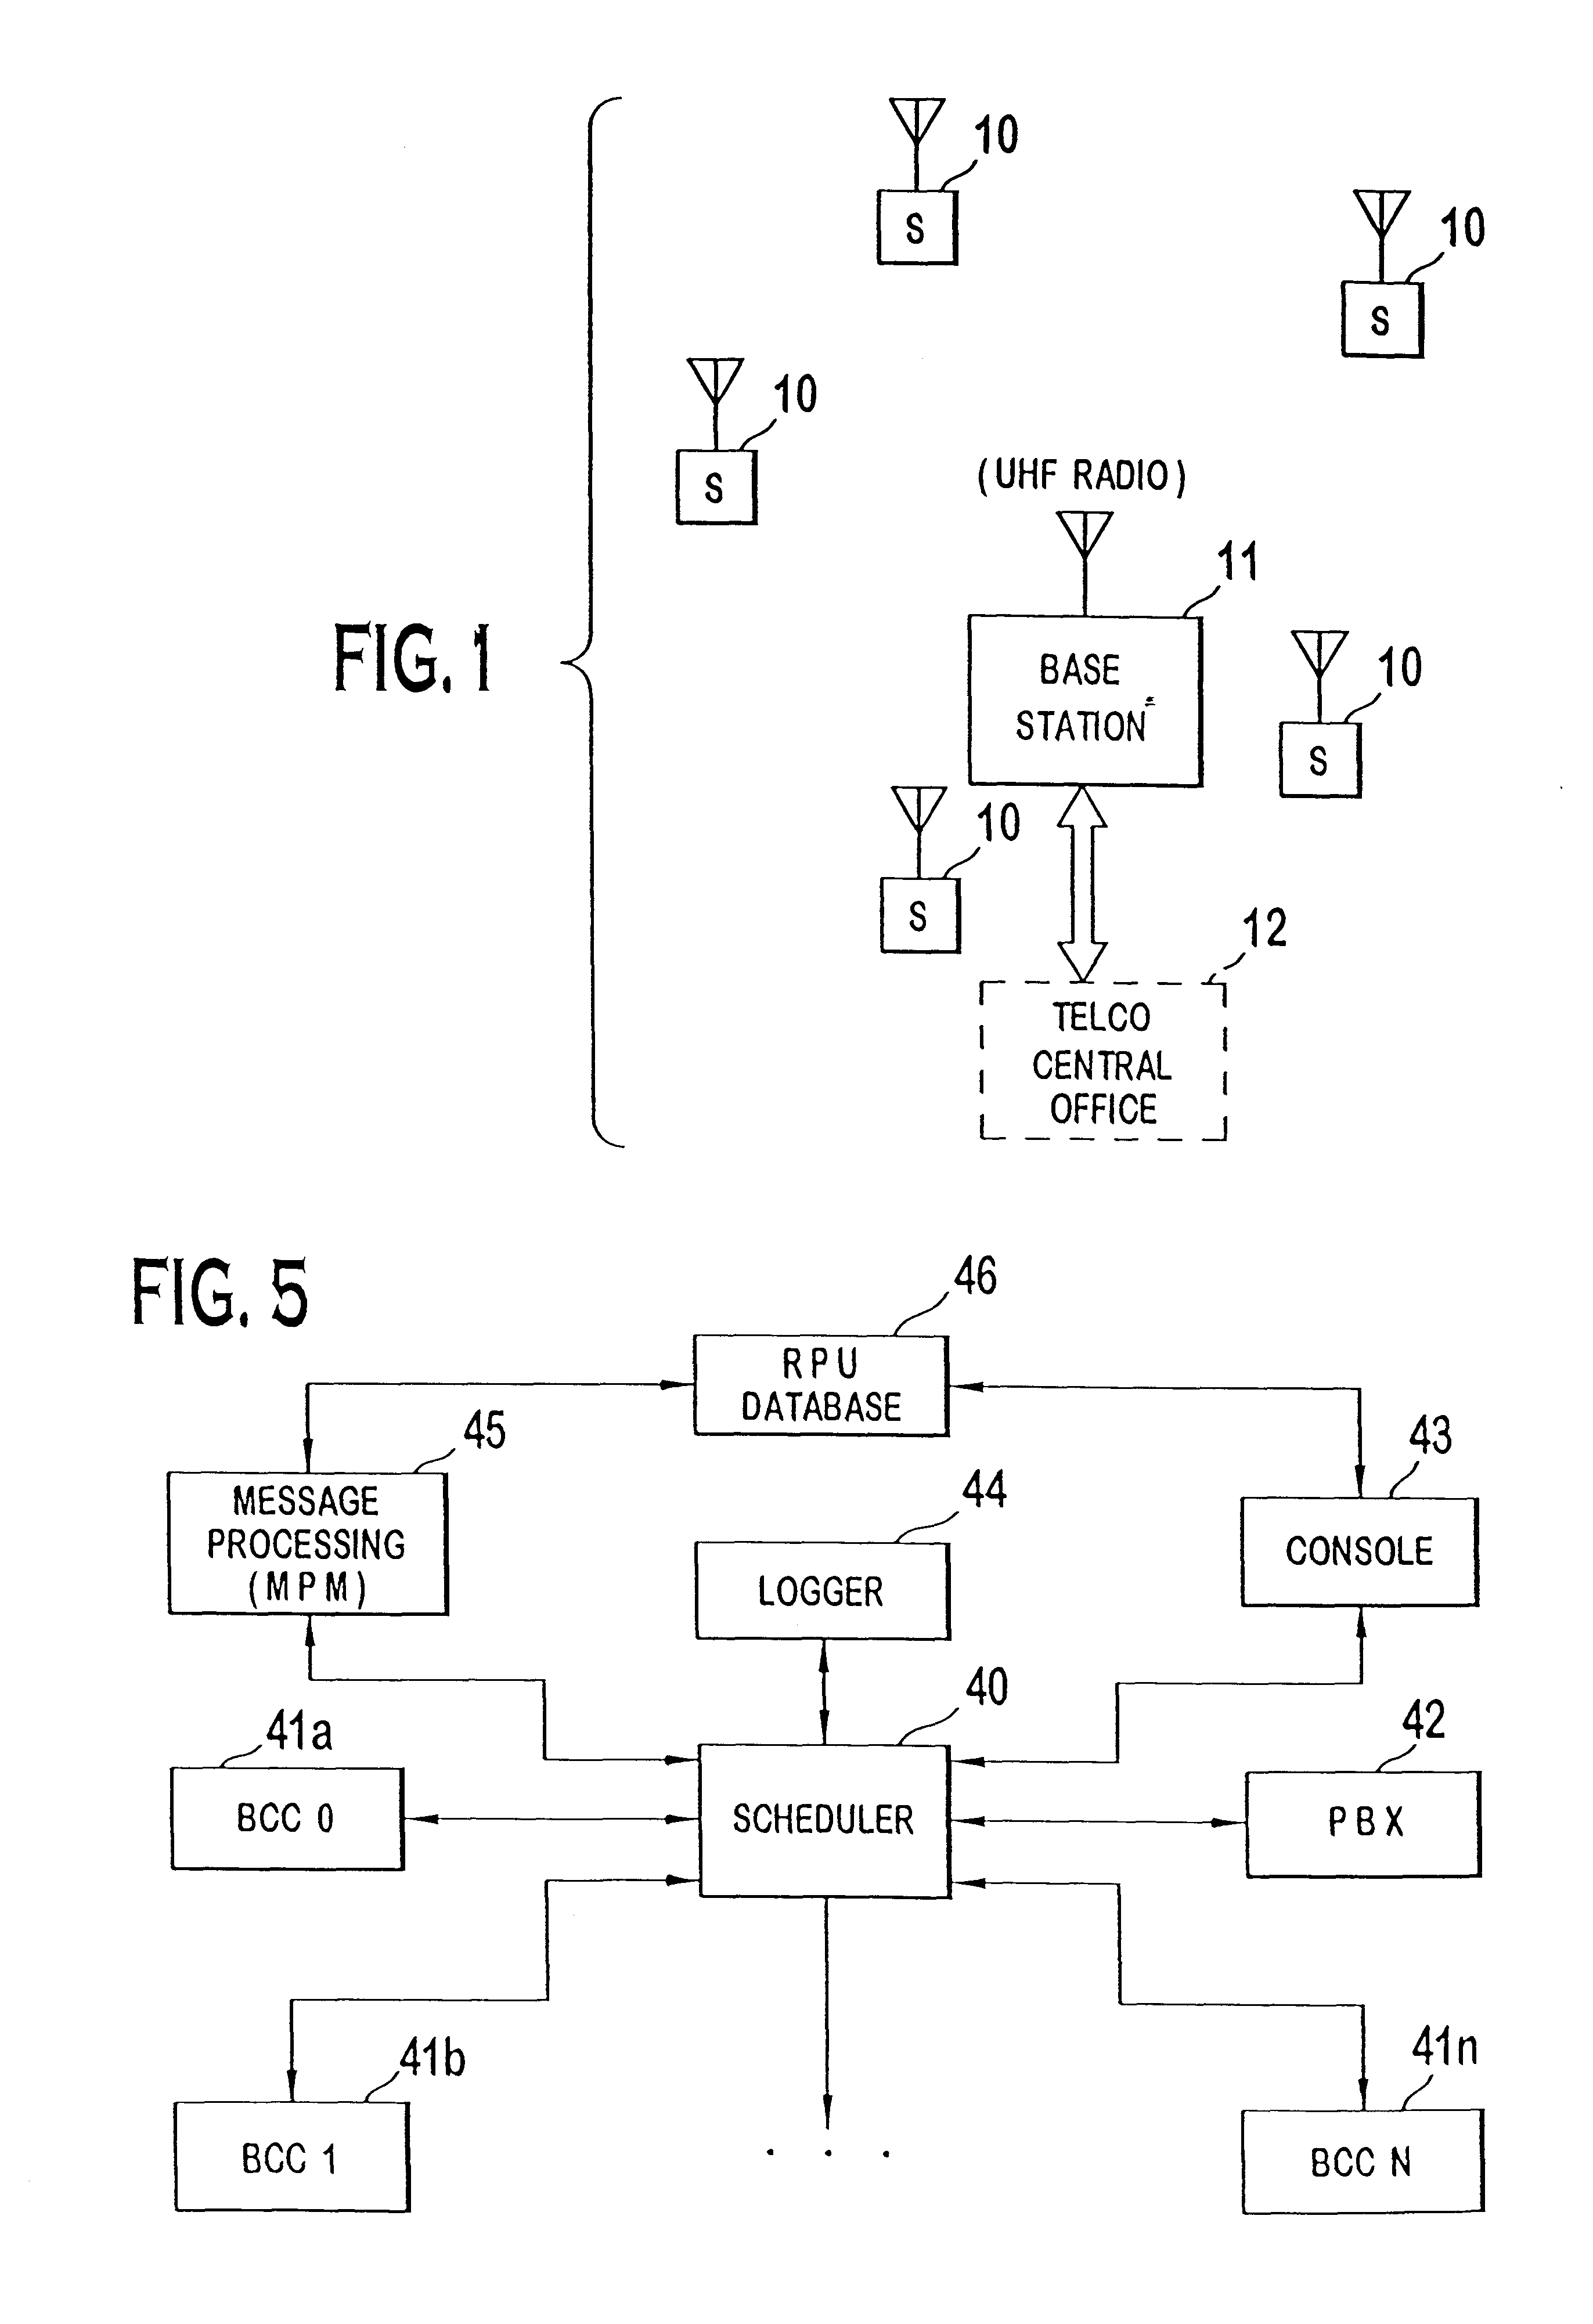 Subscriber RF telephone system for providing multiple speech and/or data signals simultaneously over either a single or a plurality of RF channels